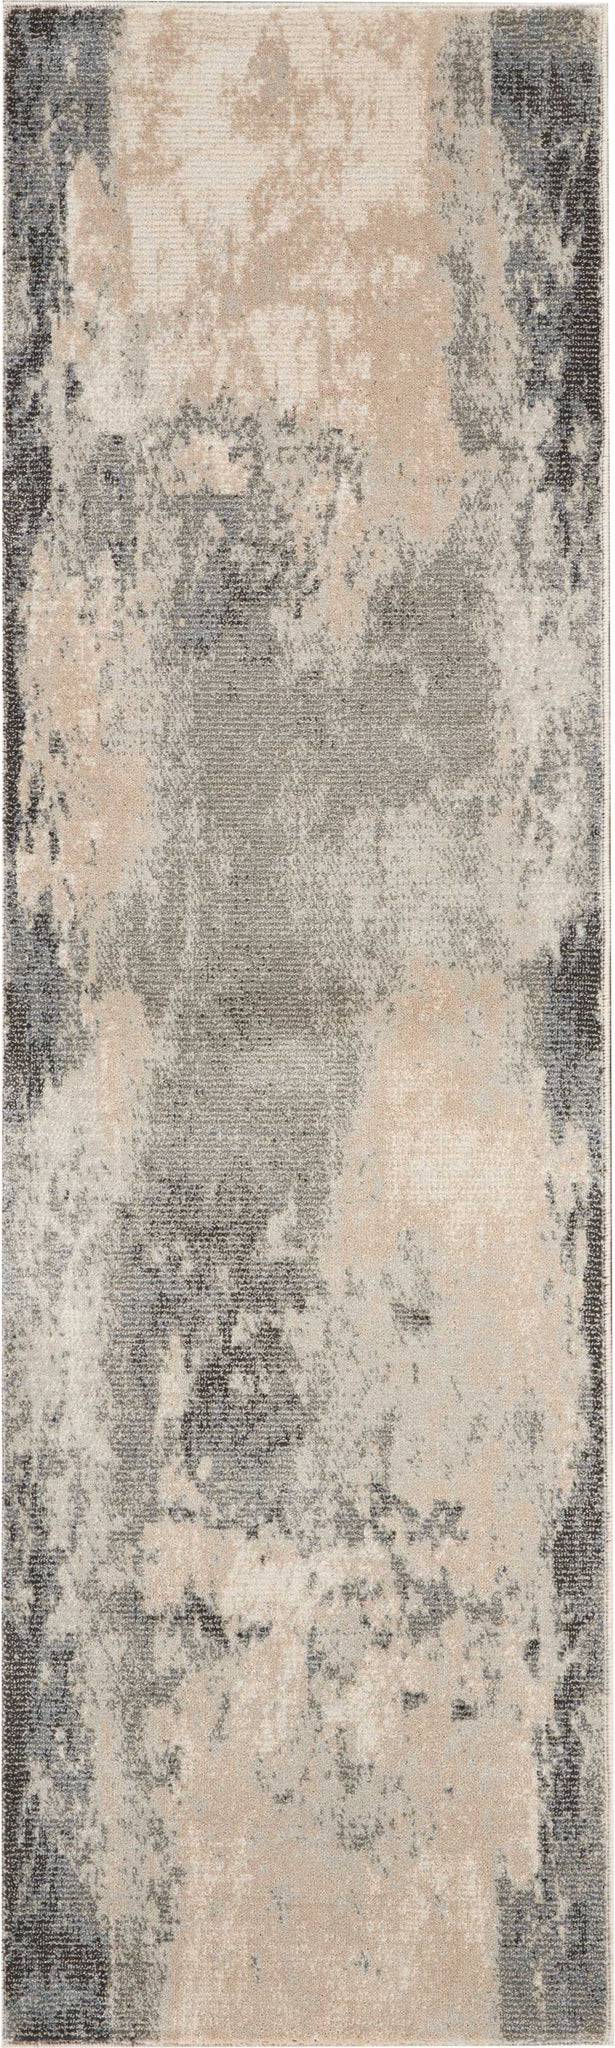 Maxell MAE13 Ivory/Grey Area Rug by Nourison main image